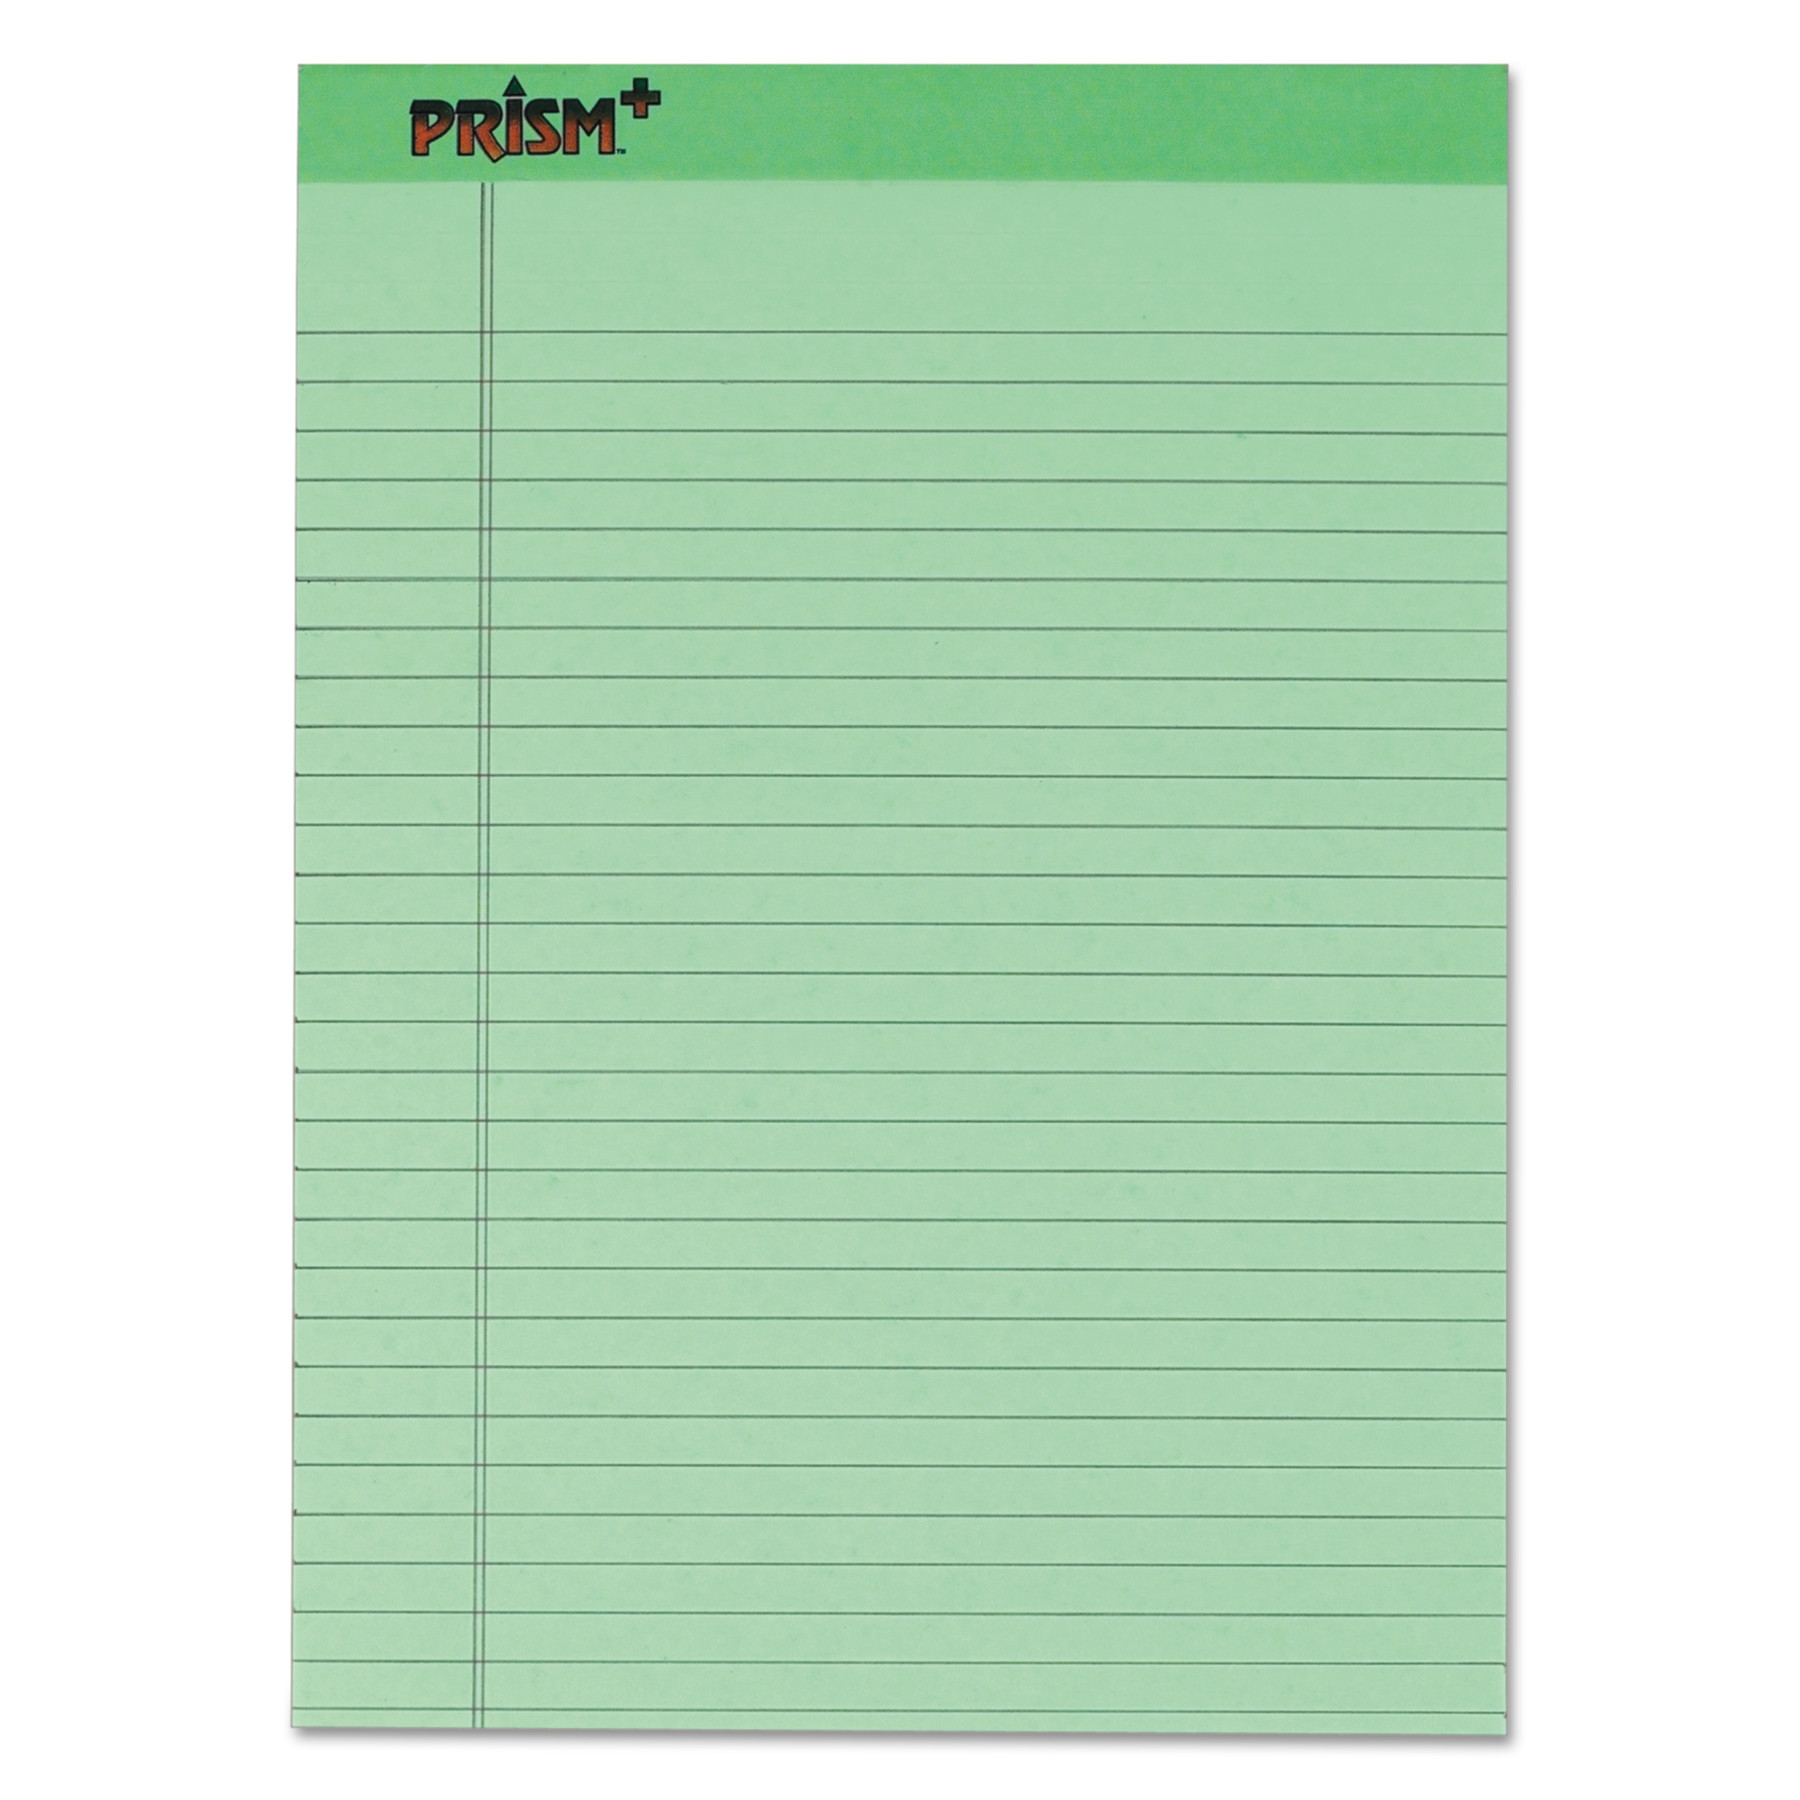 TOPS Prism Plus Wide Rule Green Legal Pad - 50 Sheets - Strip - 16 lb Basis Weight - 8 1/2" x 11 3/4" - 11.75" x 8.5" - Green Pa